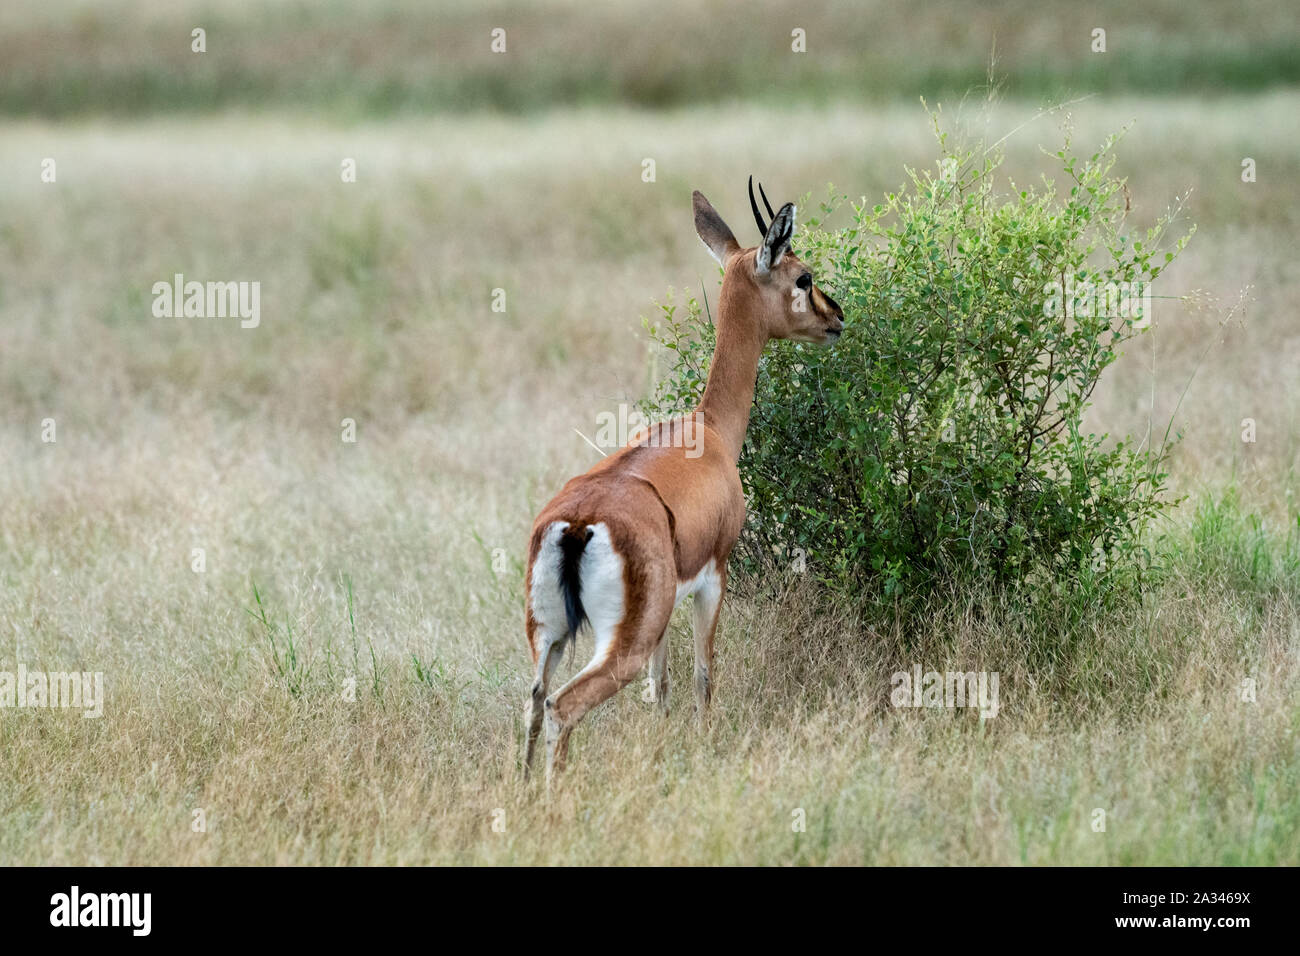 Chinkara or Gazella bennettii or Indian gazelle an Antelope. A grazing deer on green grass in open field in monsoon during safari of ranthambore park Stock Photo